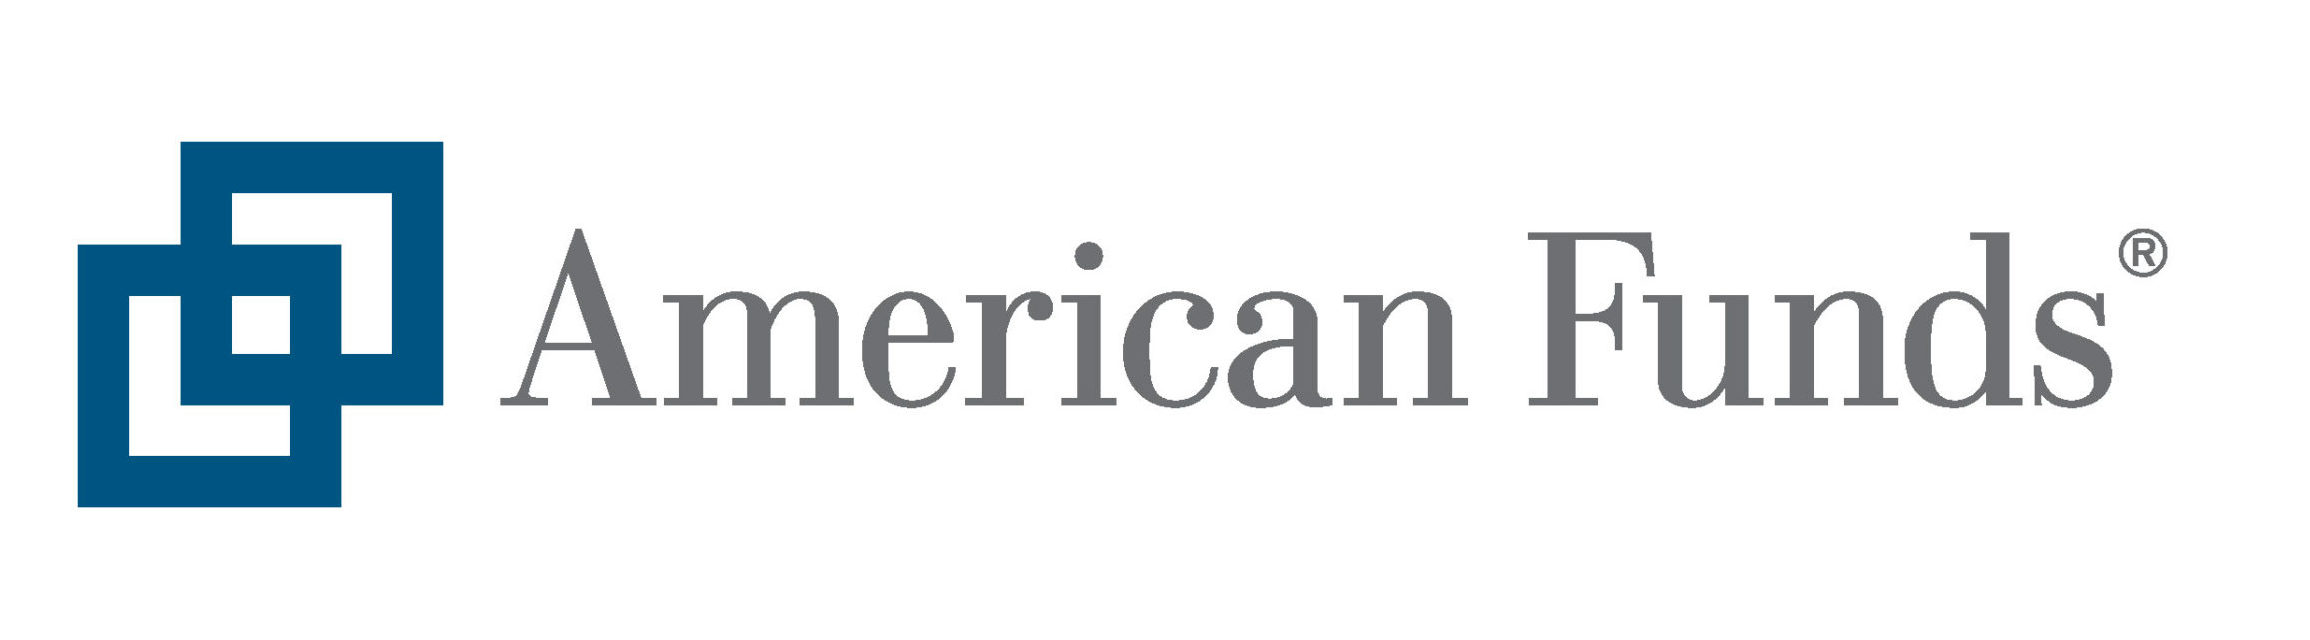 American_Funds